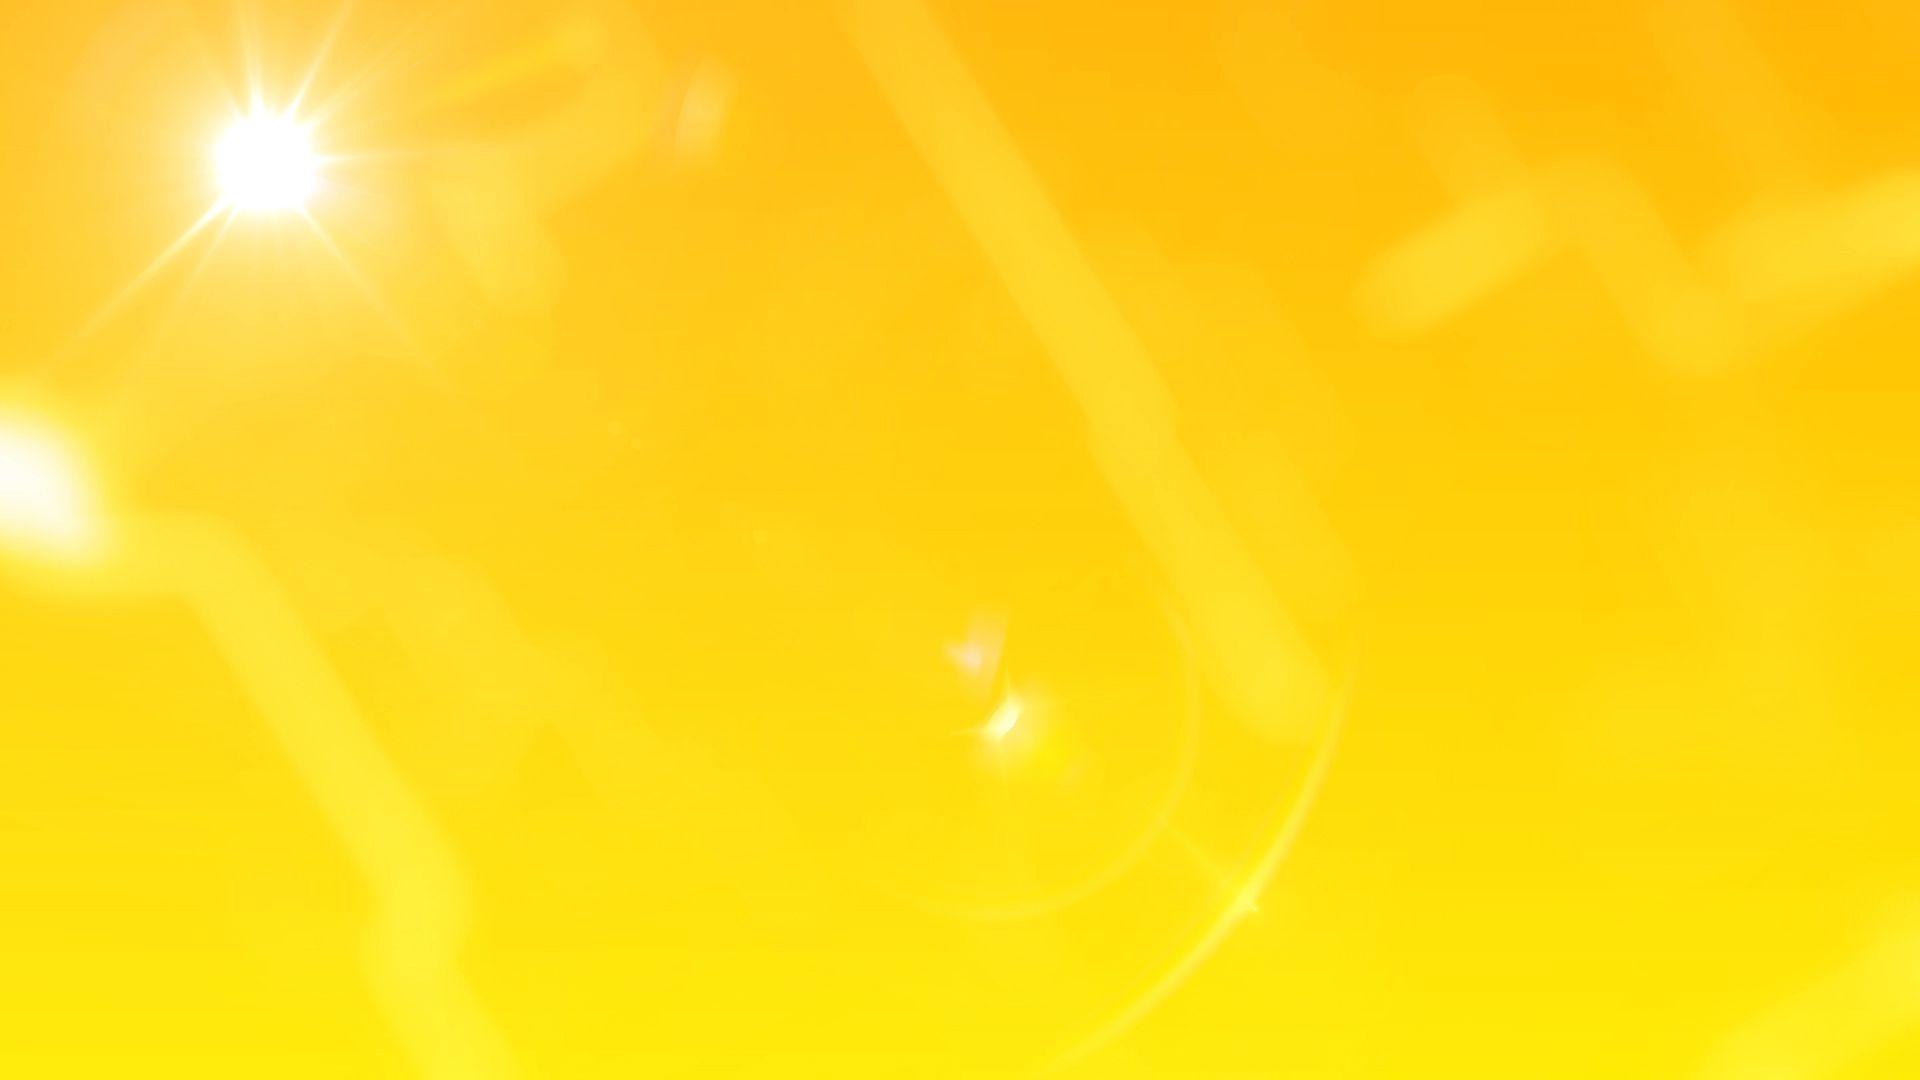 Shining light and yellow powerpoint background